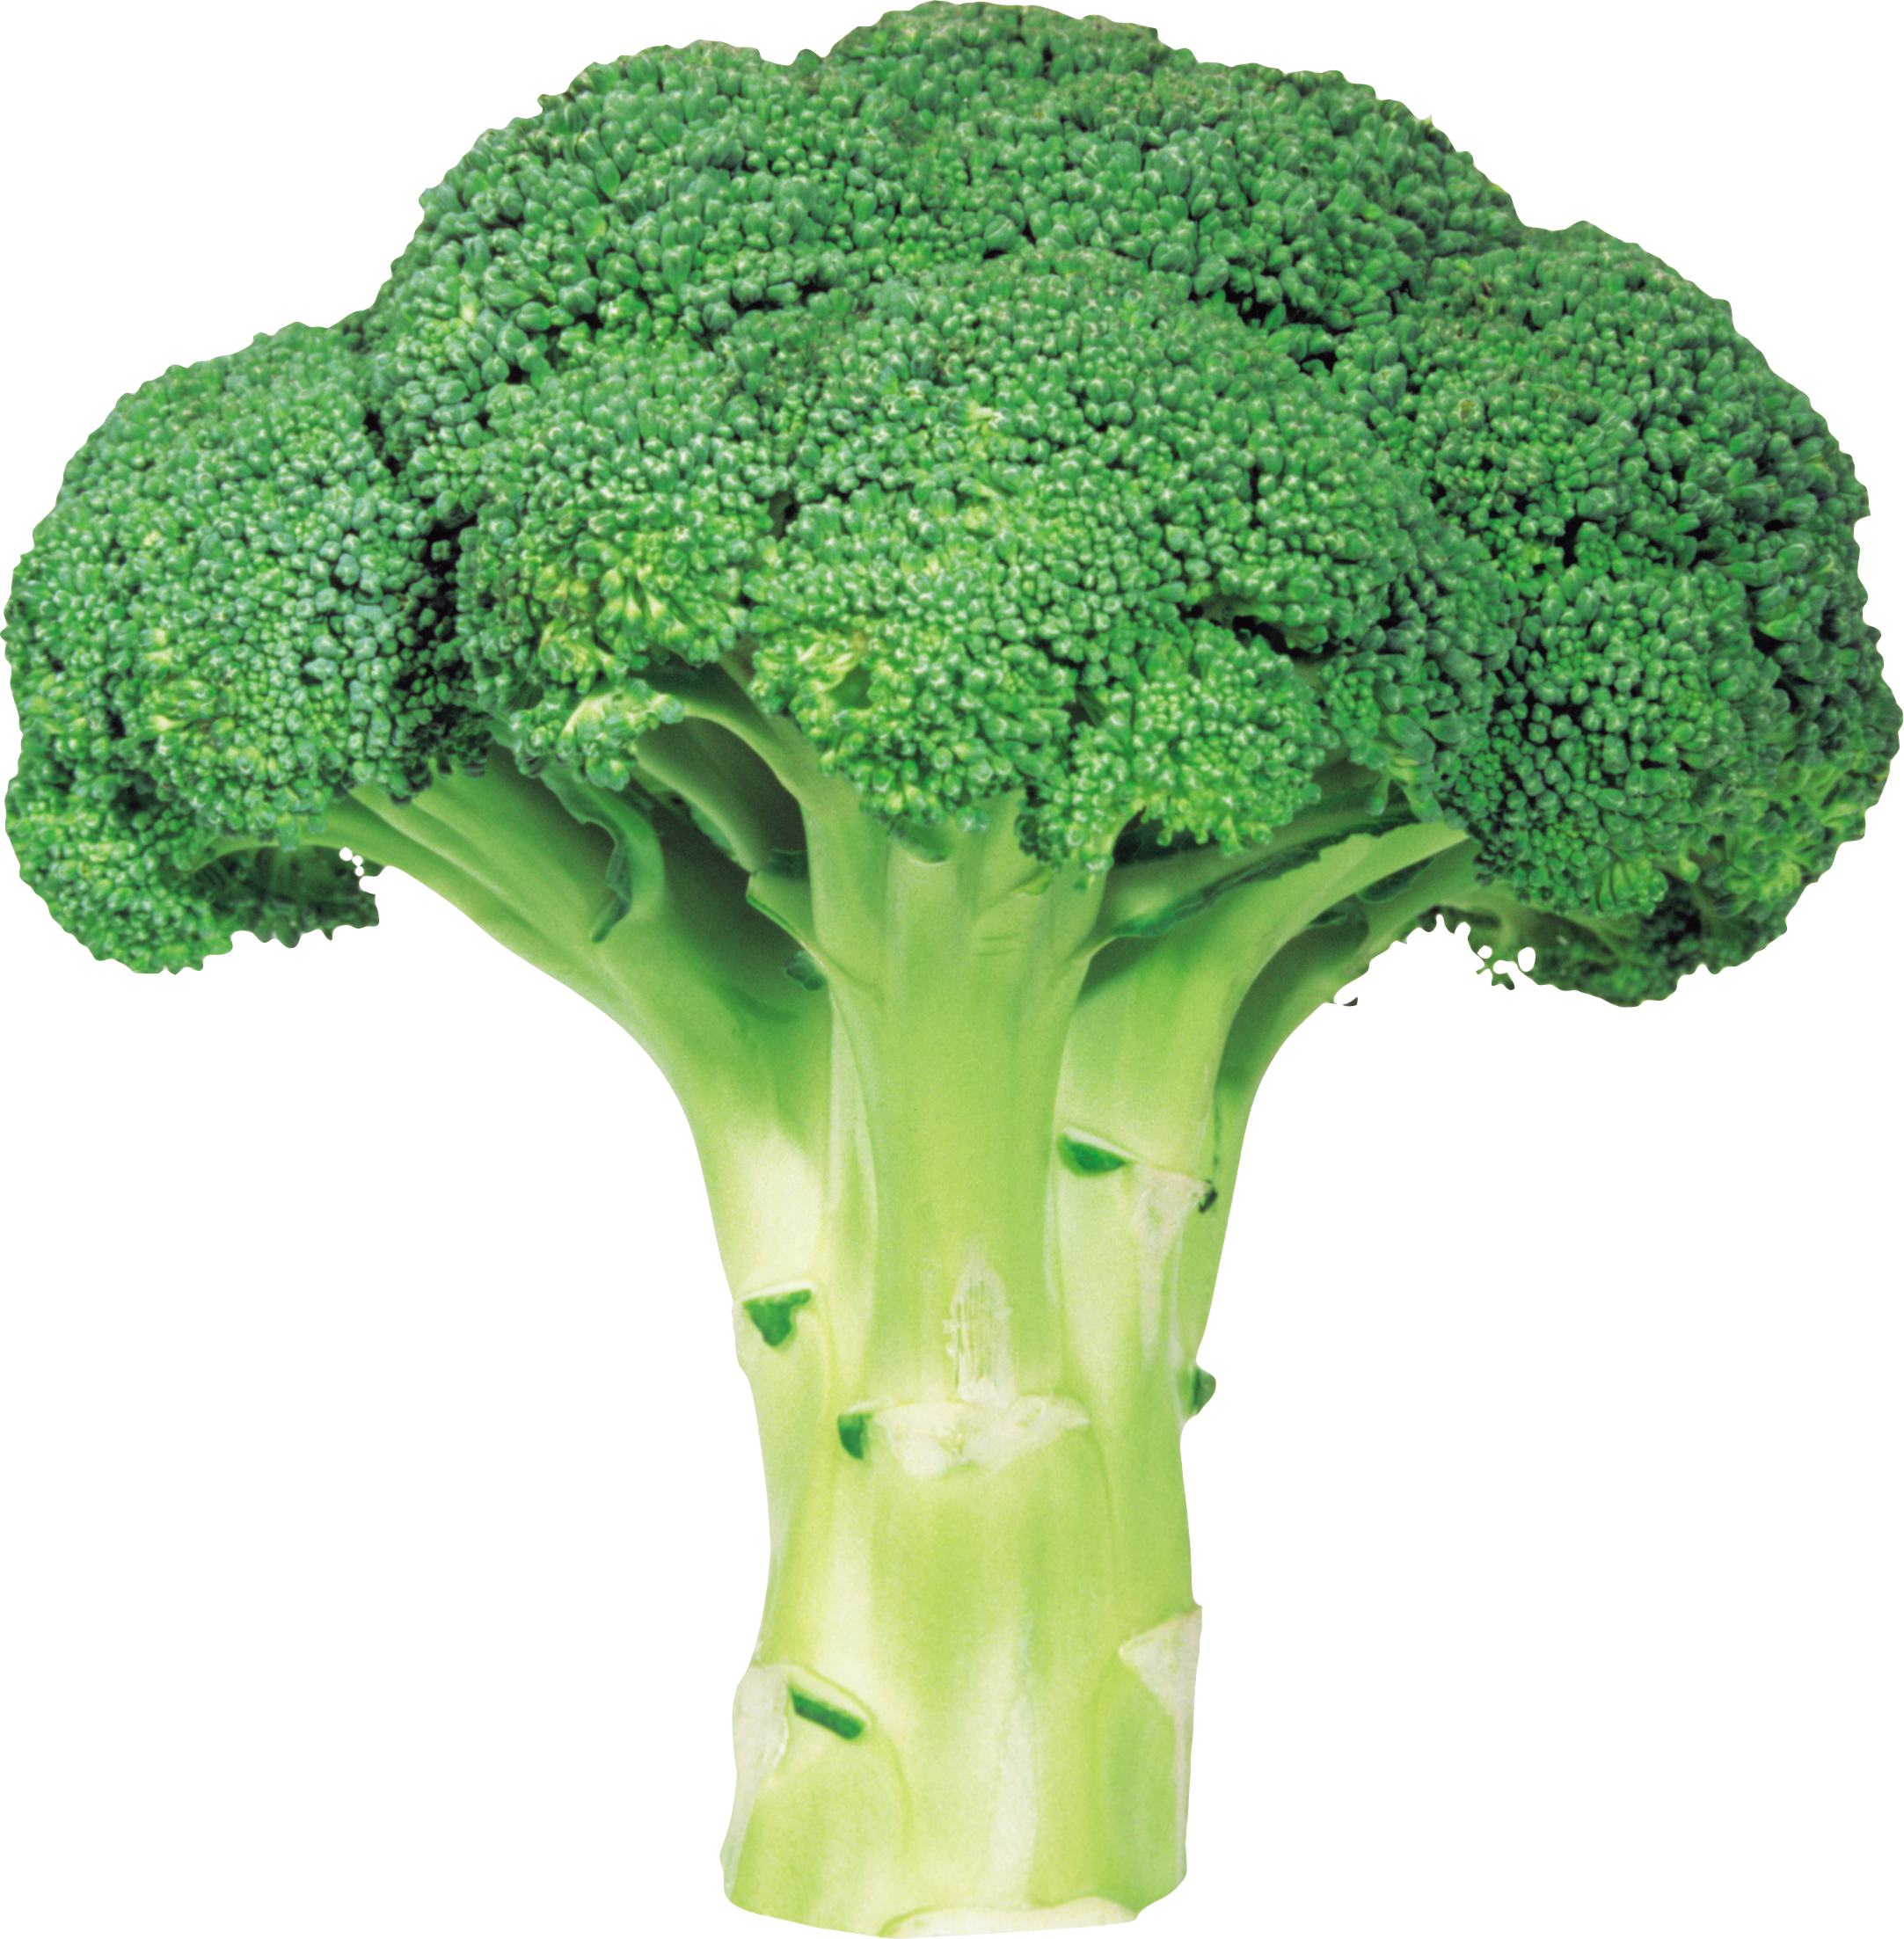 Broccoli PNG image with transparent background